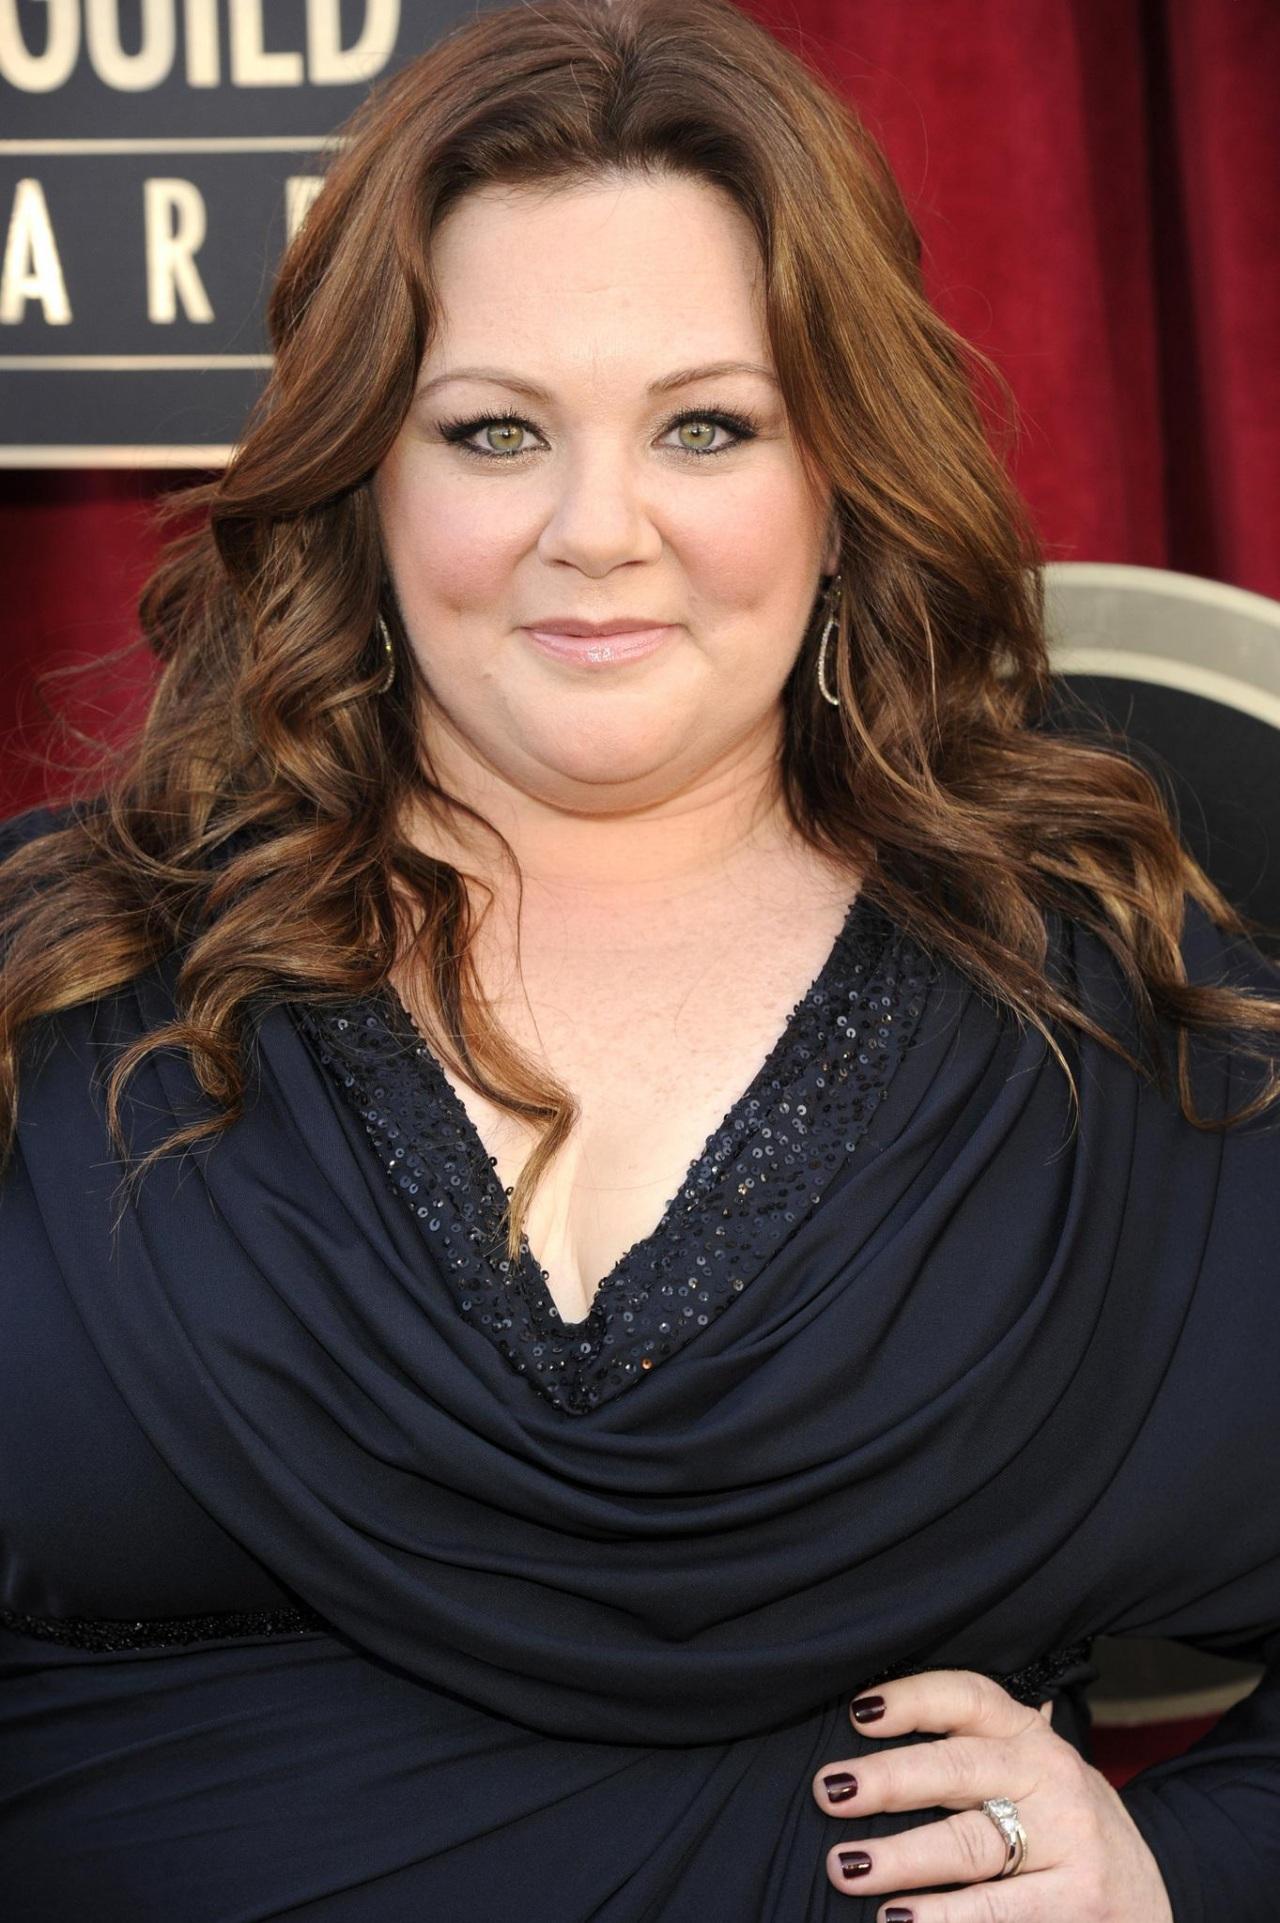 Melissa McCarthy is going to be in Ghostbusters!